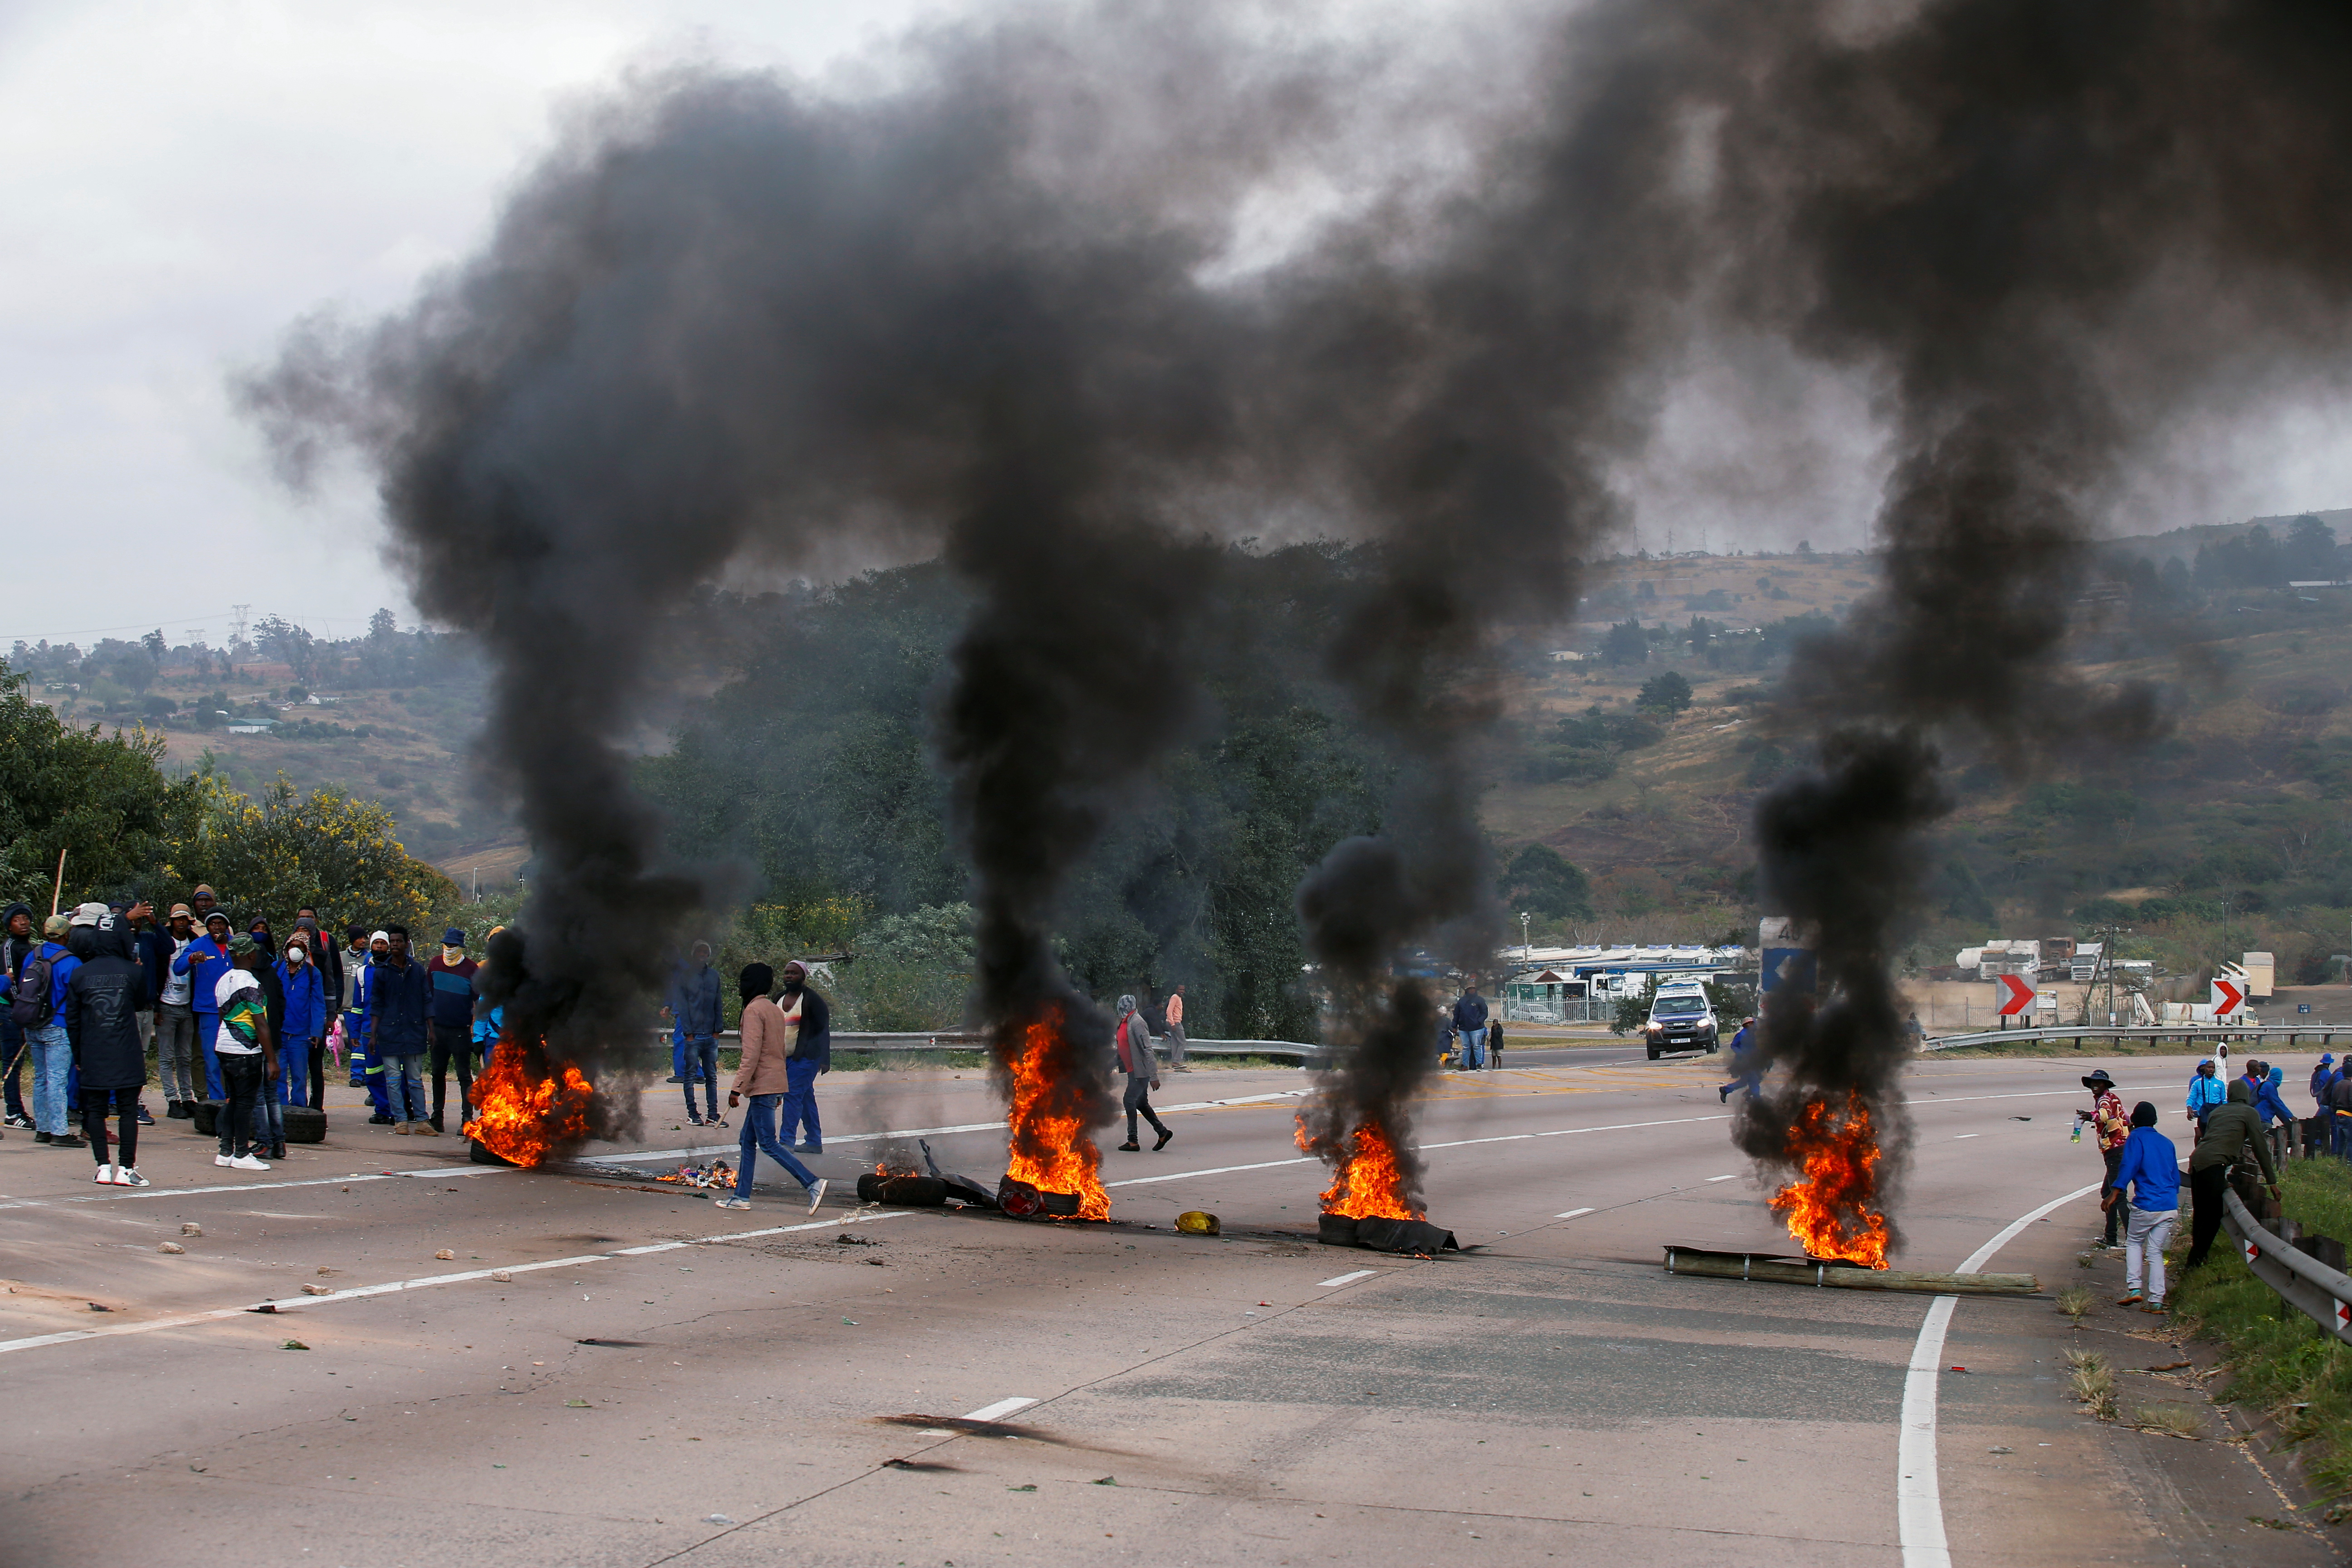 Supporters of former South African President Jacob Zuma attend a protest in Peacevale